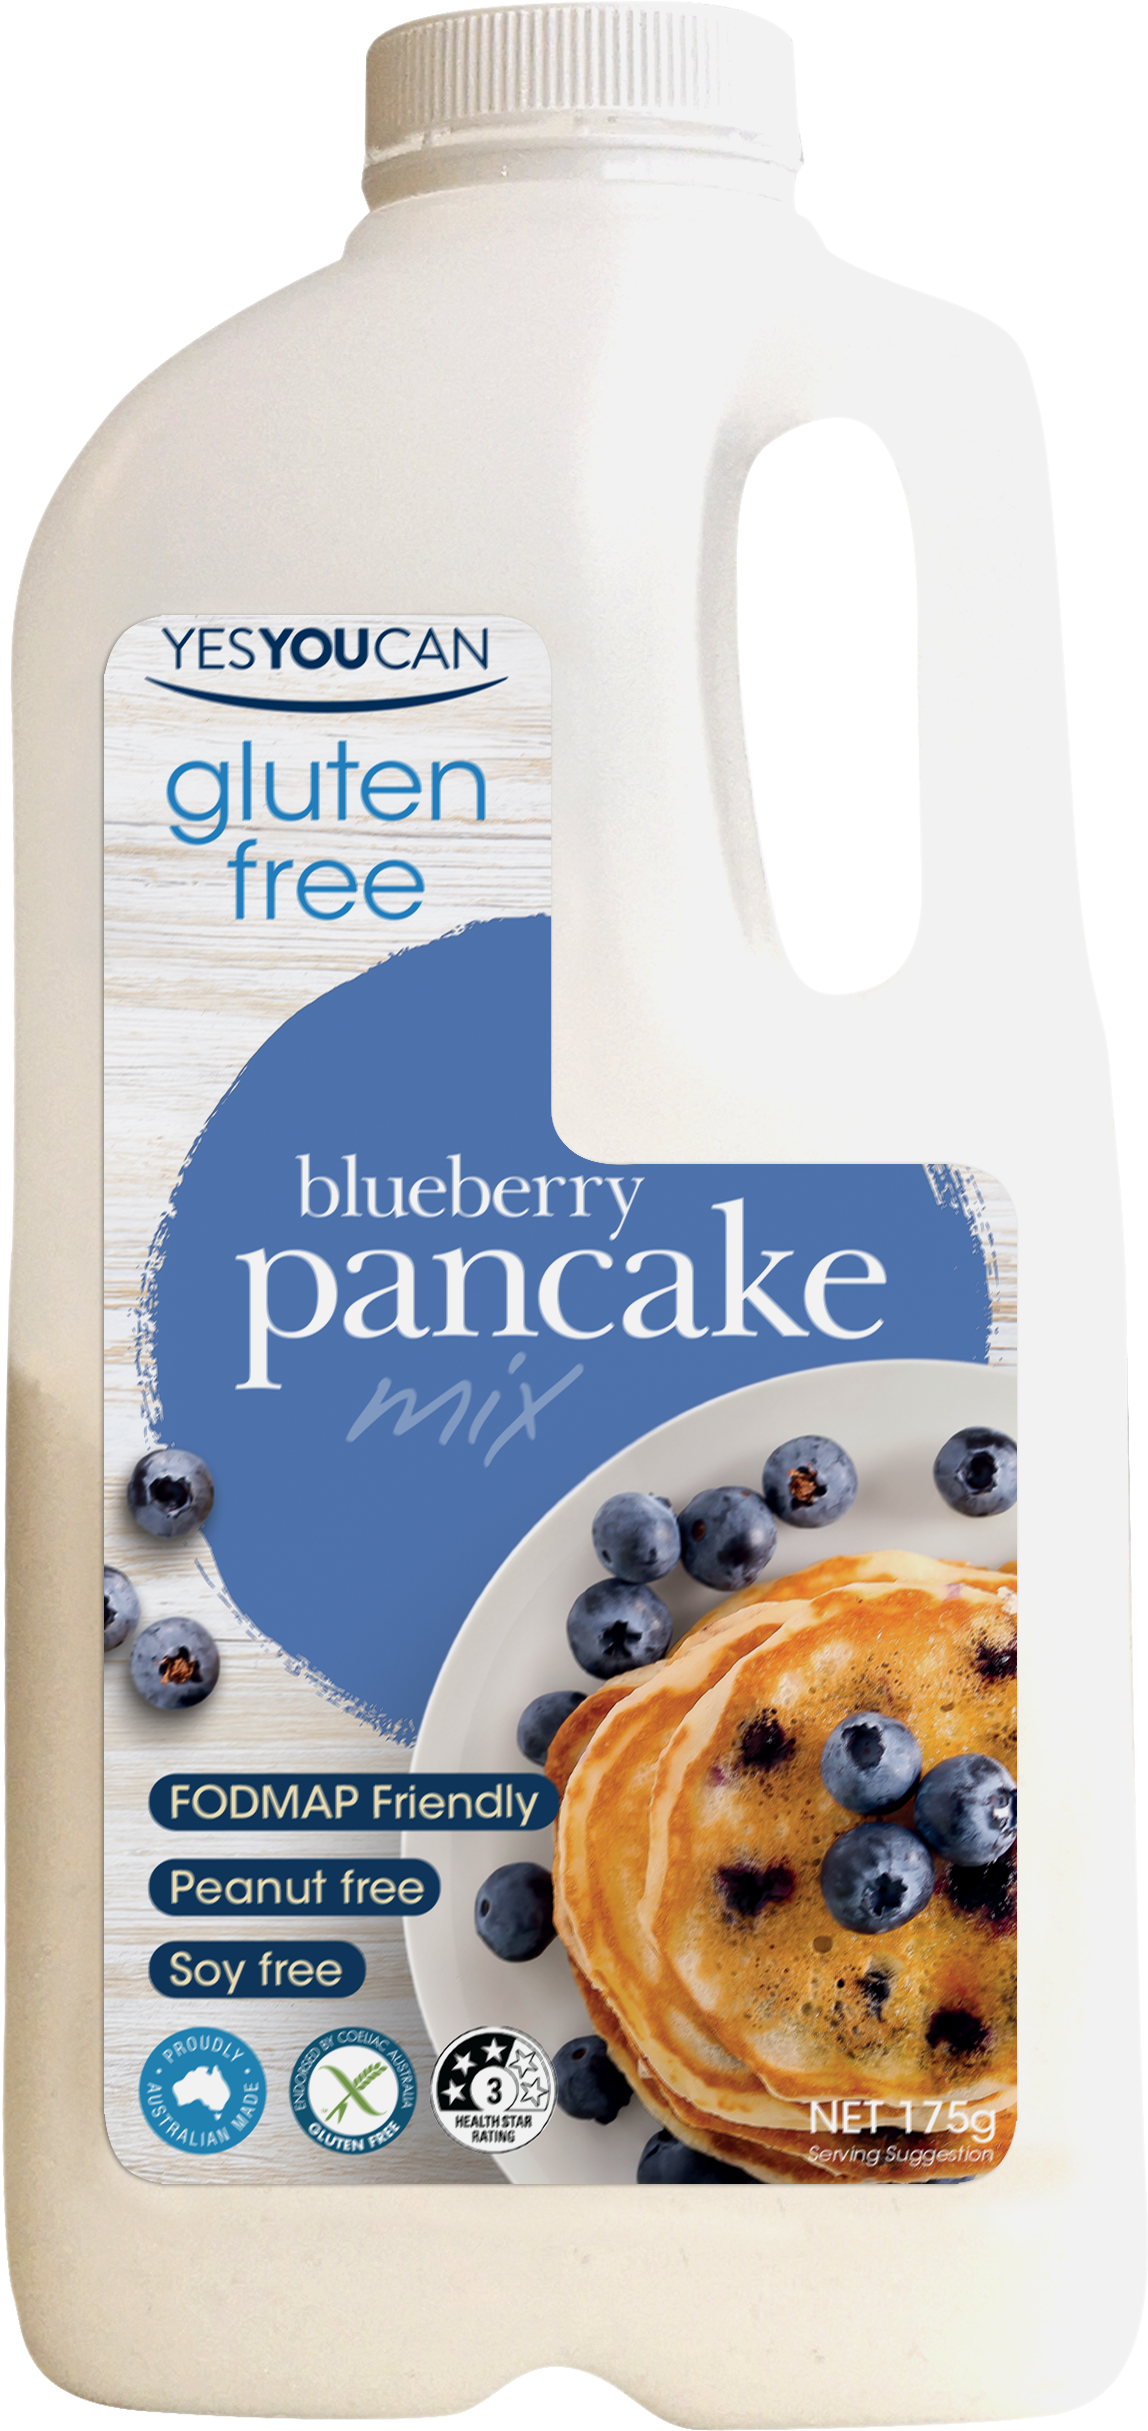  blueberry pancake gluten free yesyoucan front image product photo made in australia